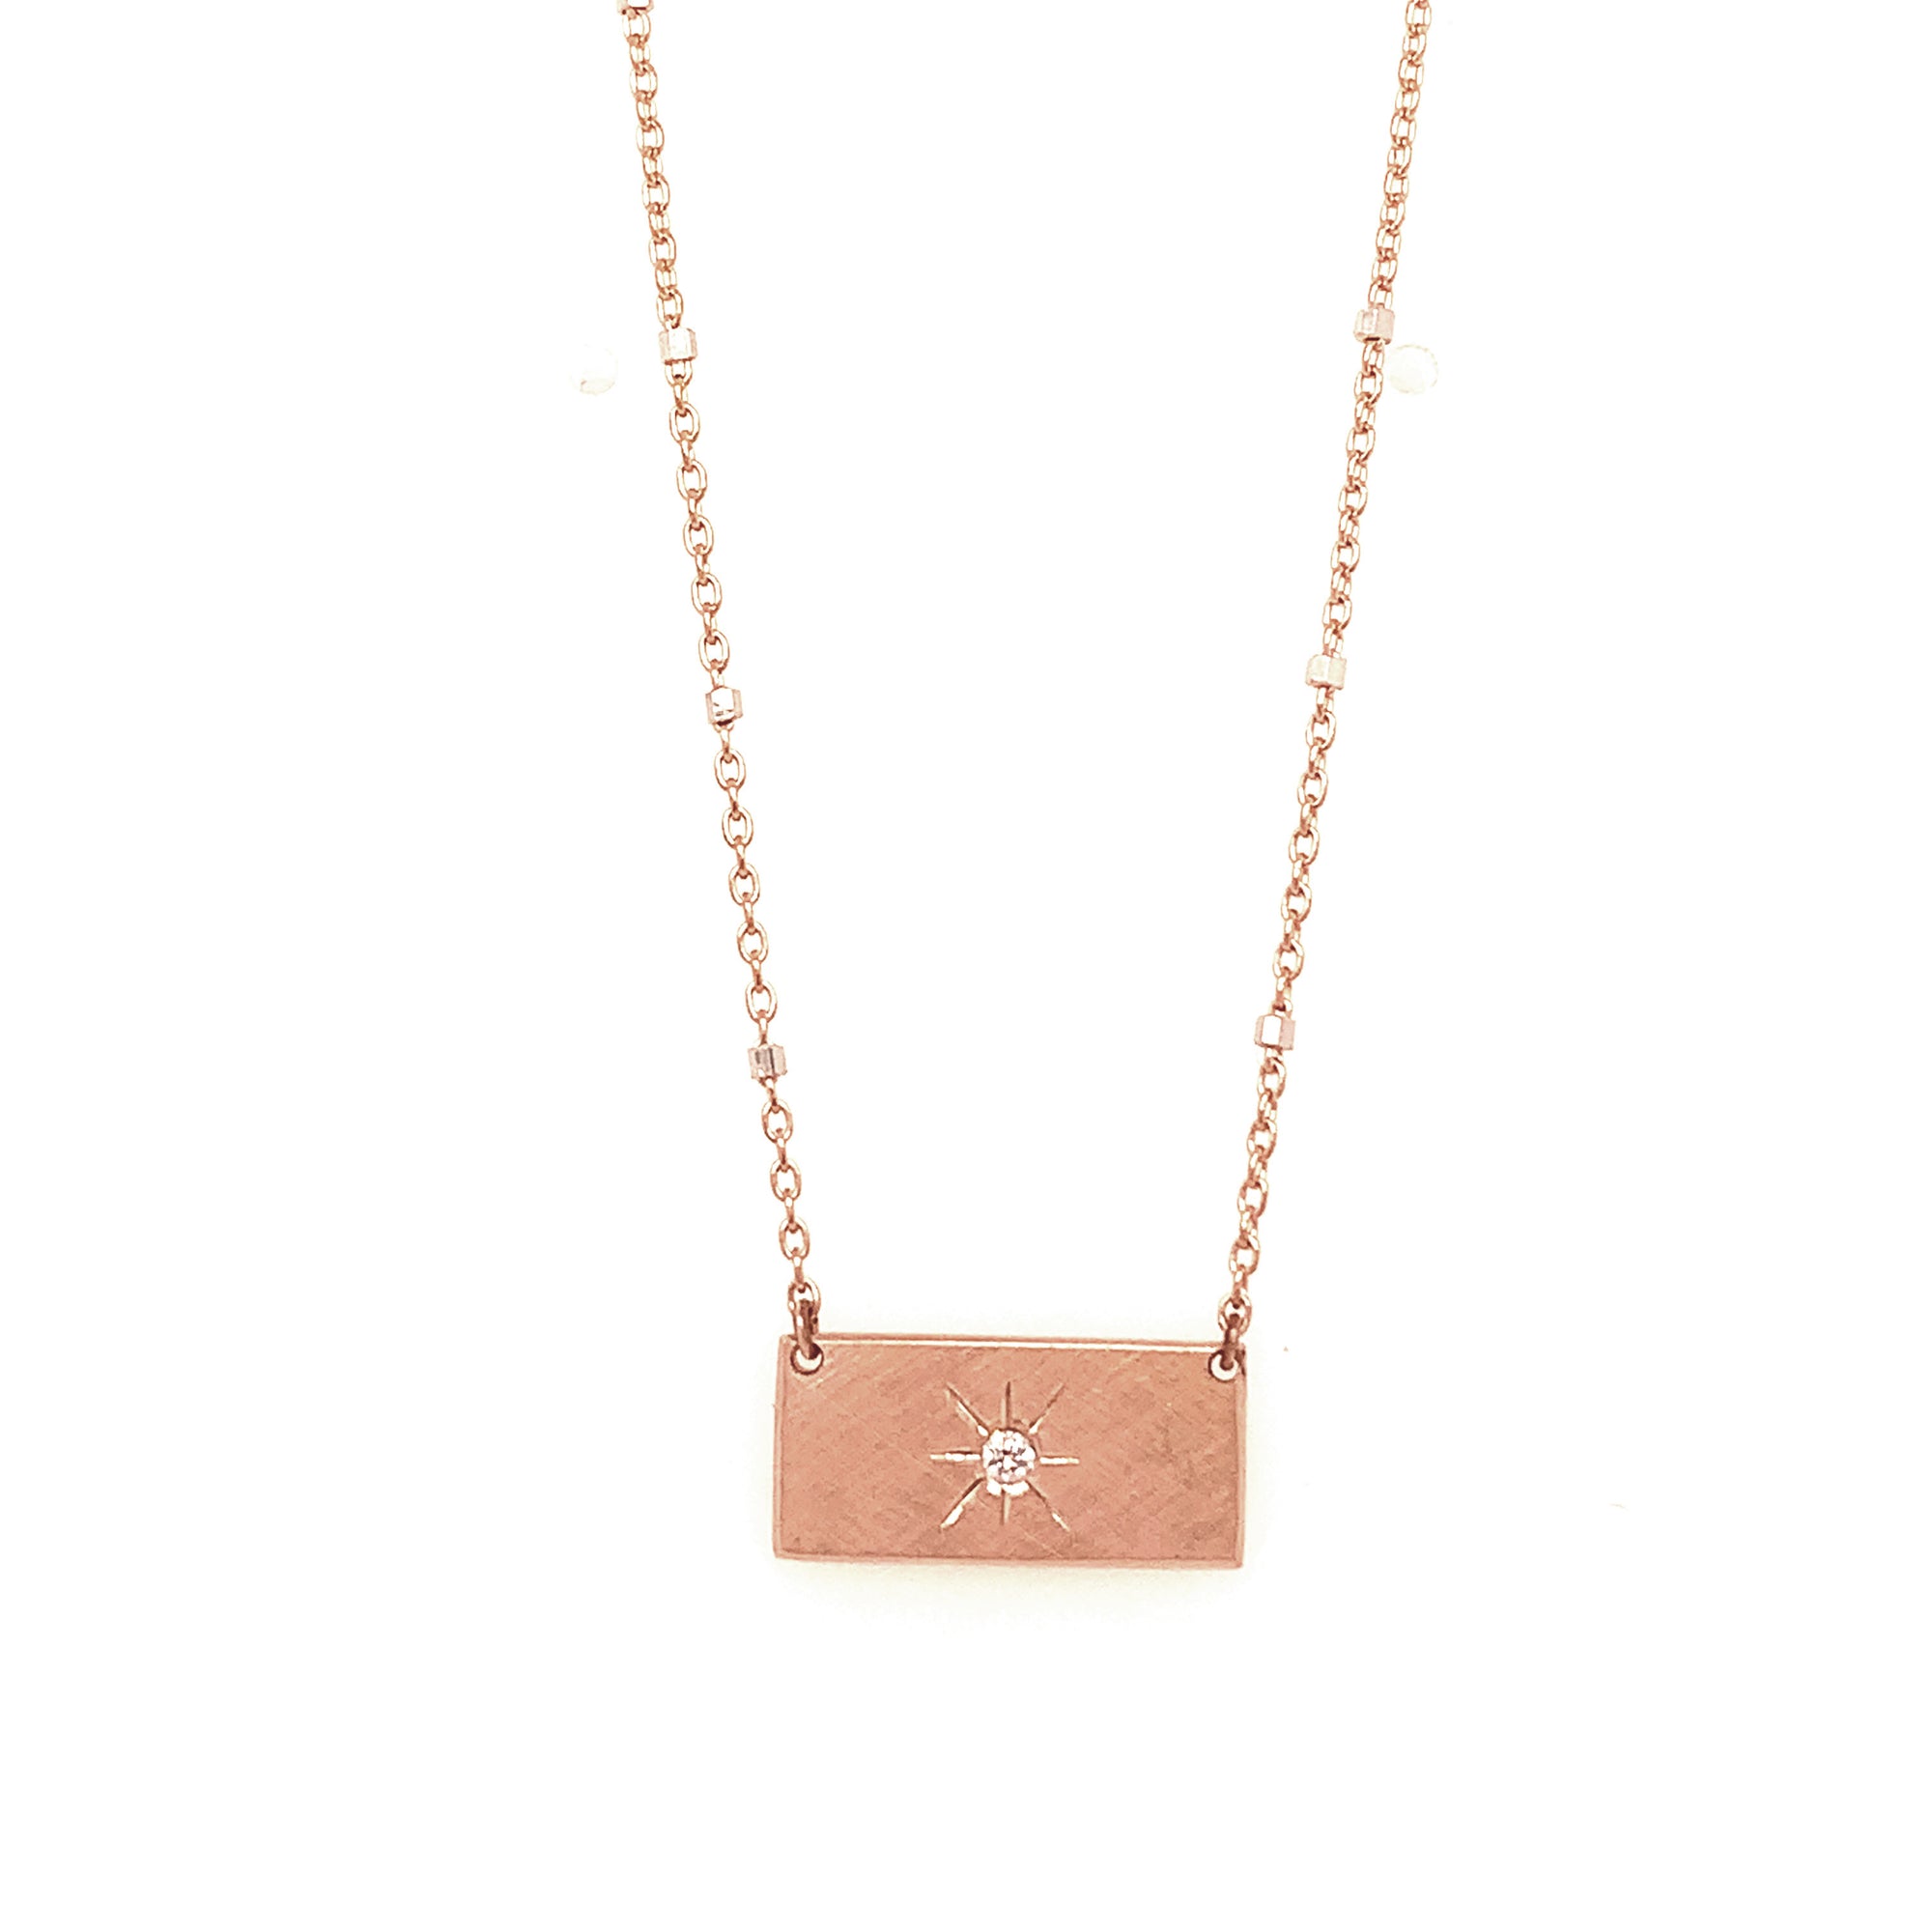 14k rose gold COCA bar necklace with diamond